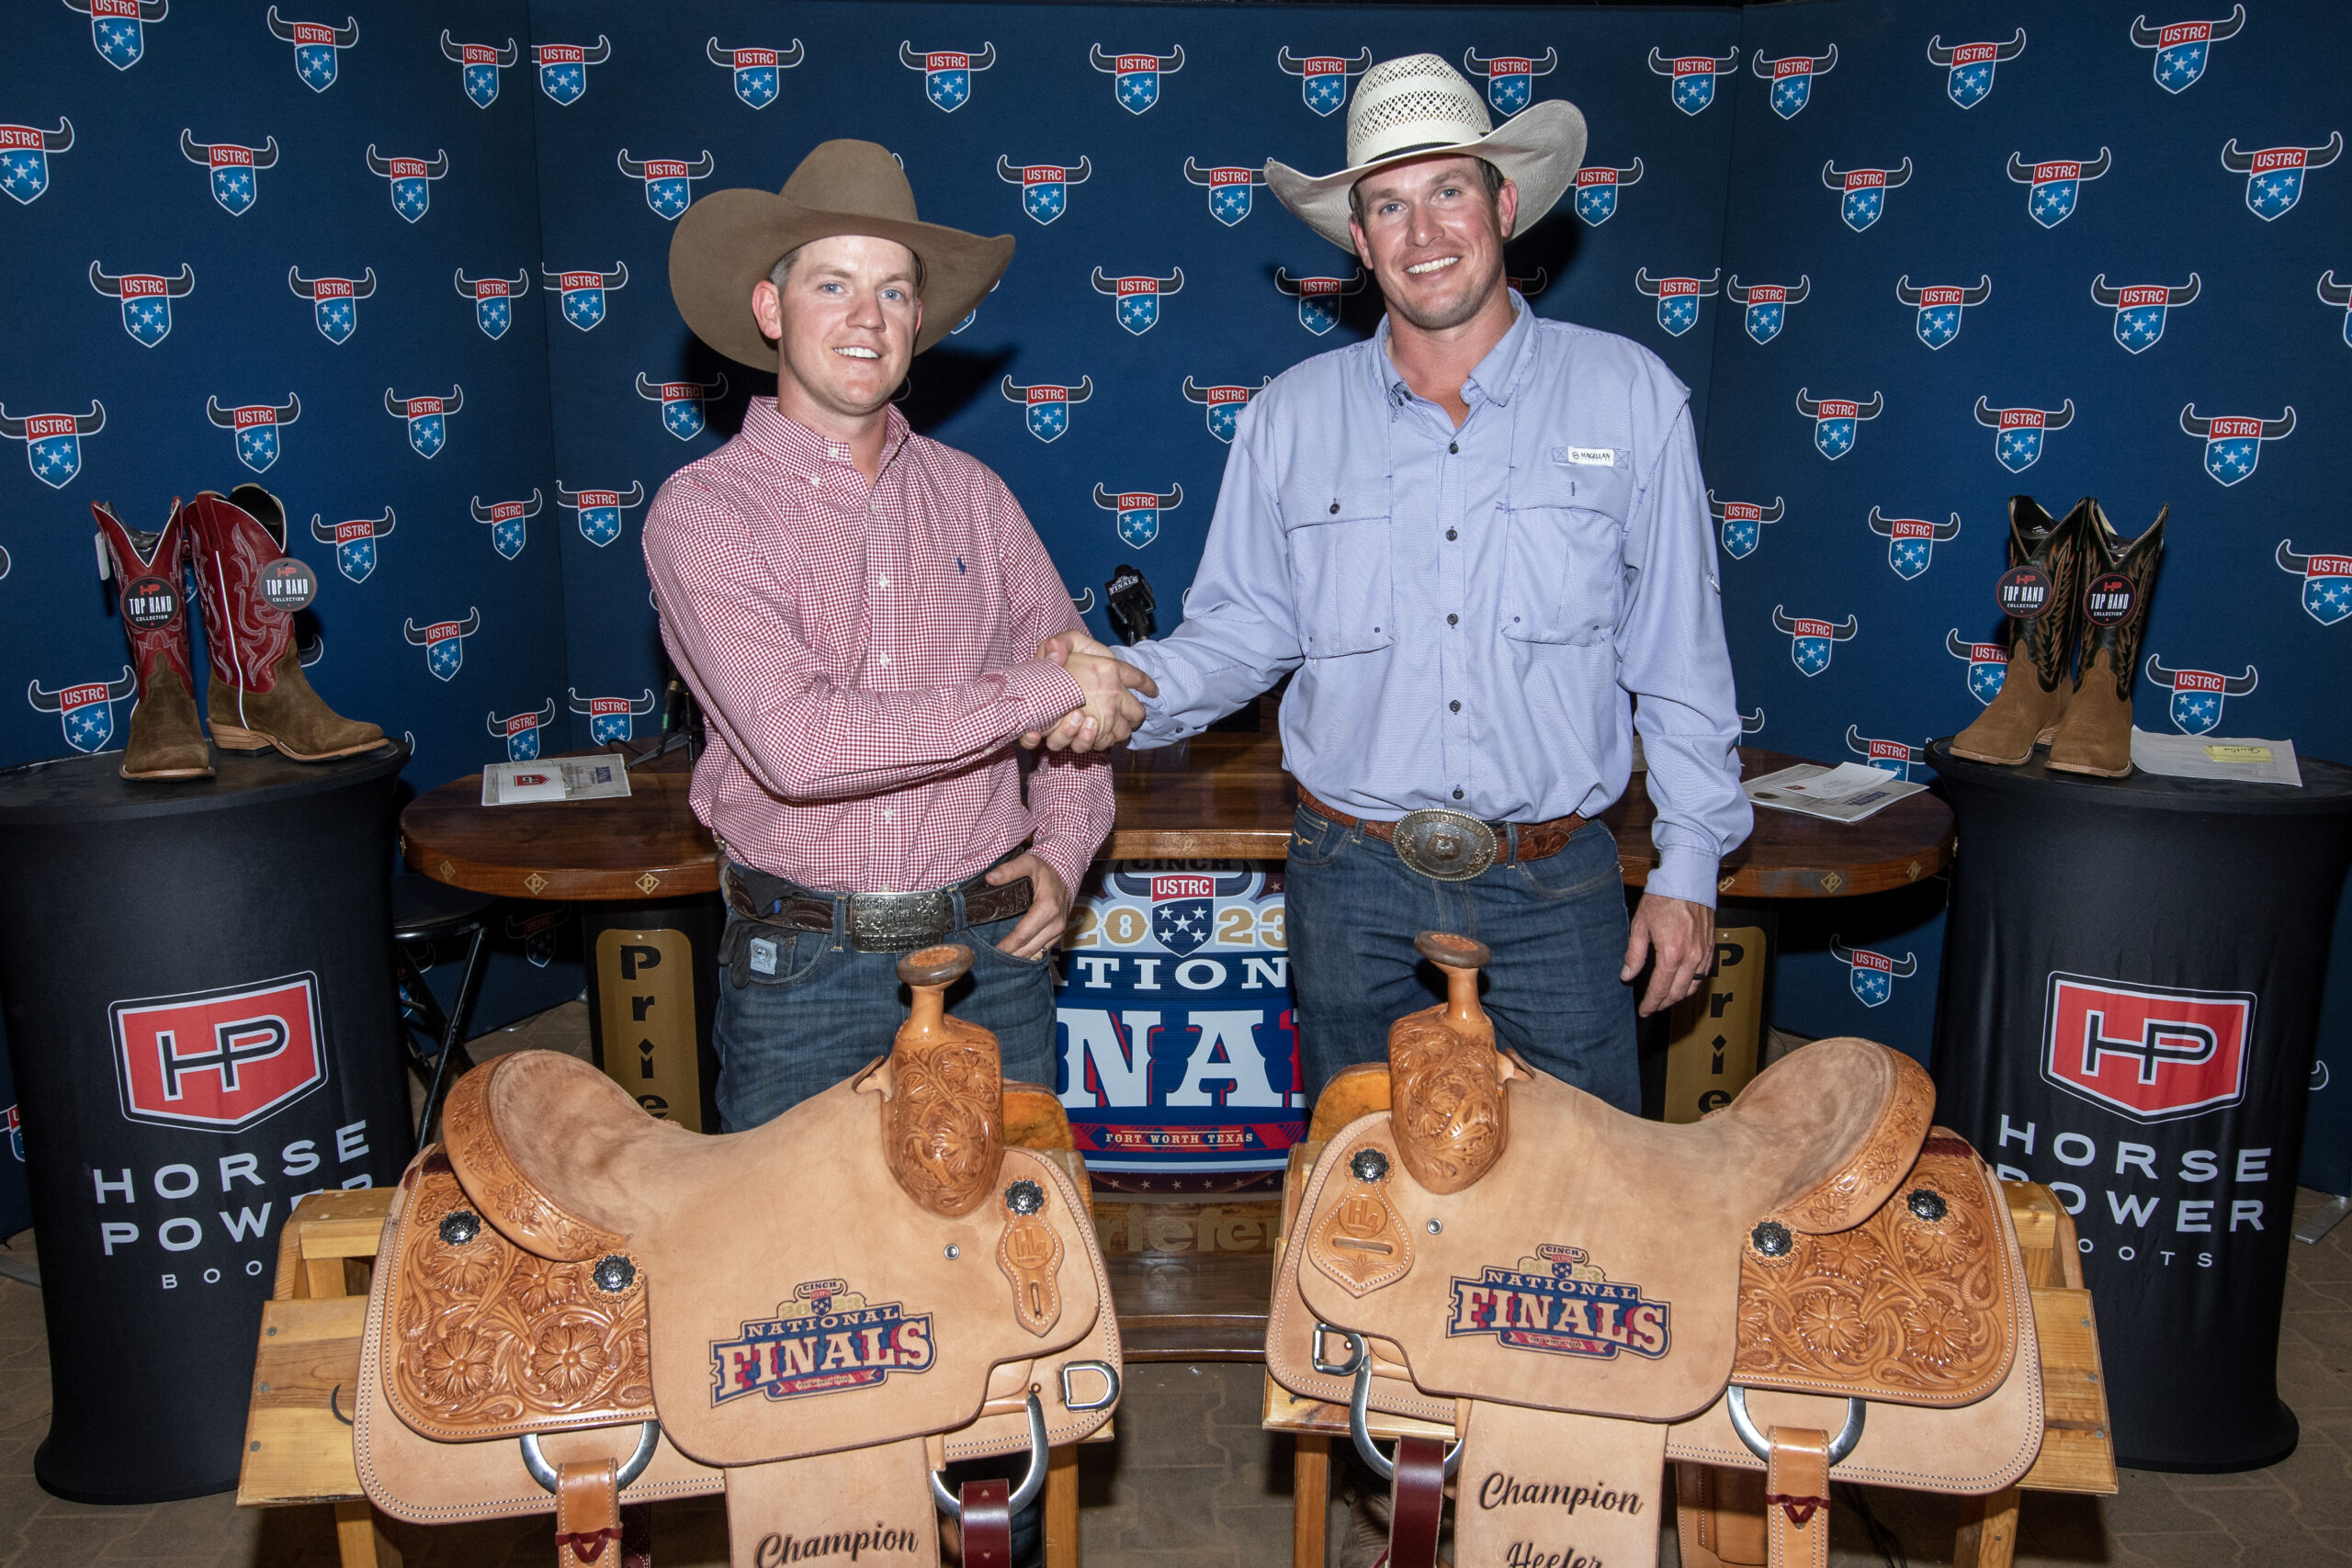 Shane McCune and Jake Cobb took home the huge purse of $72,700 in the Resistol 12.5 Shootout at the 2023 USTRC Cinch National Finals of Team Roping. 